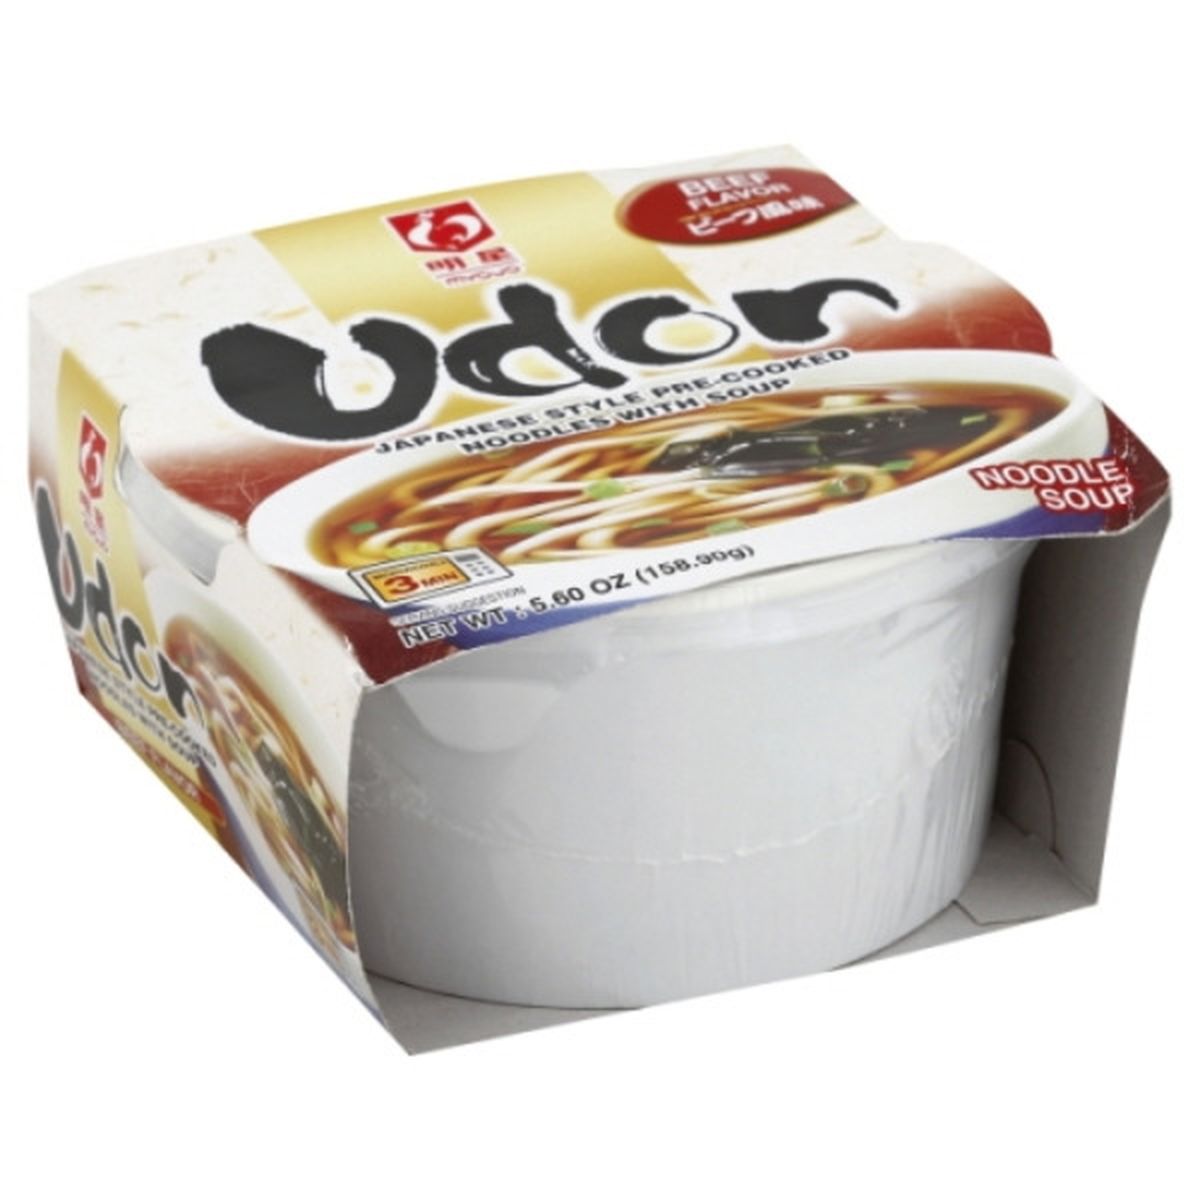 Calories in Myojo Noodle Soup, Udon, Beef Flavor, Japanese Style